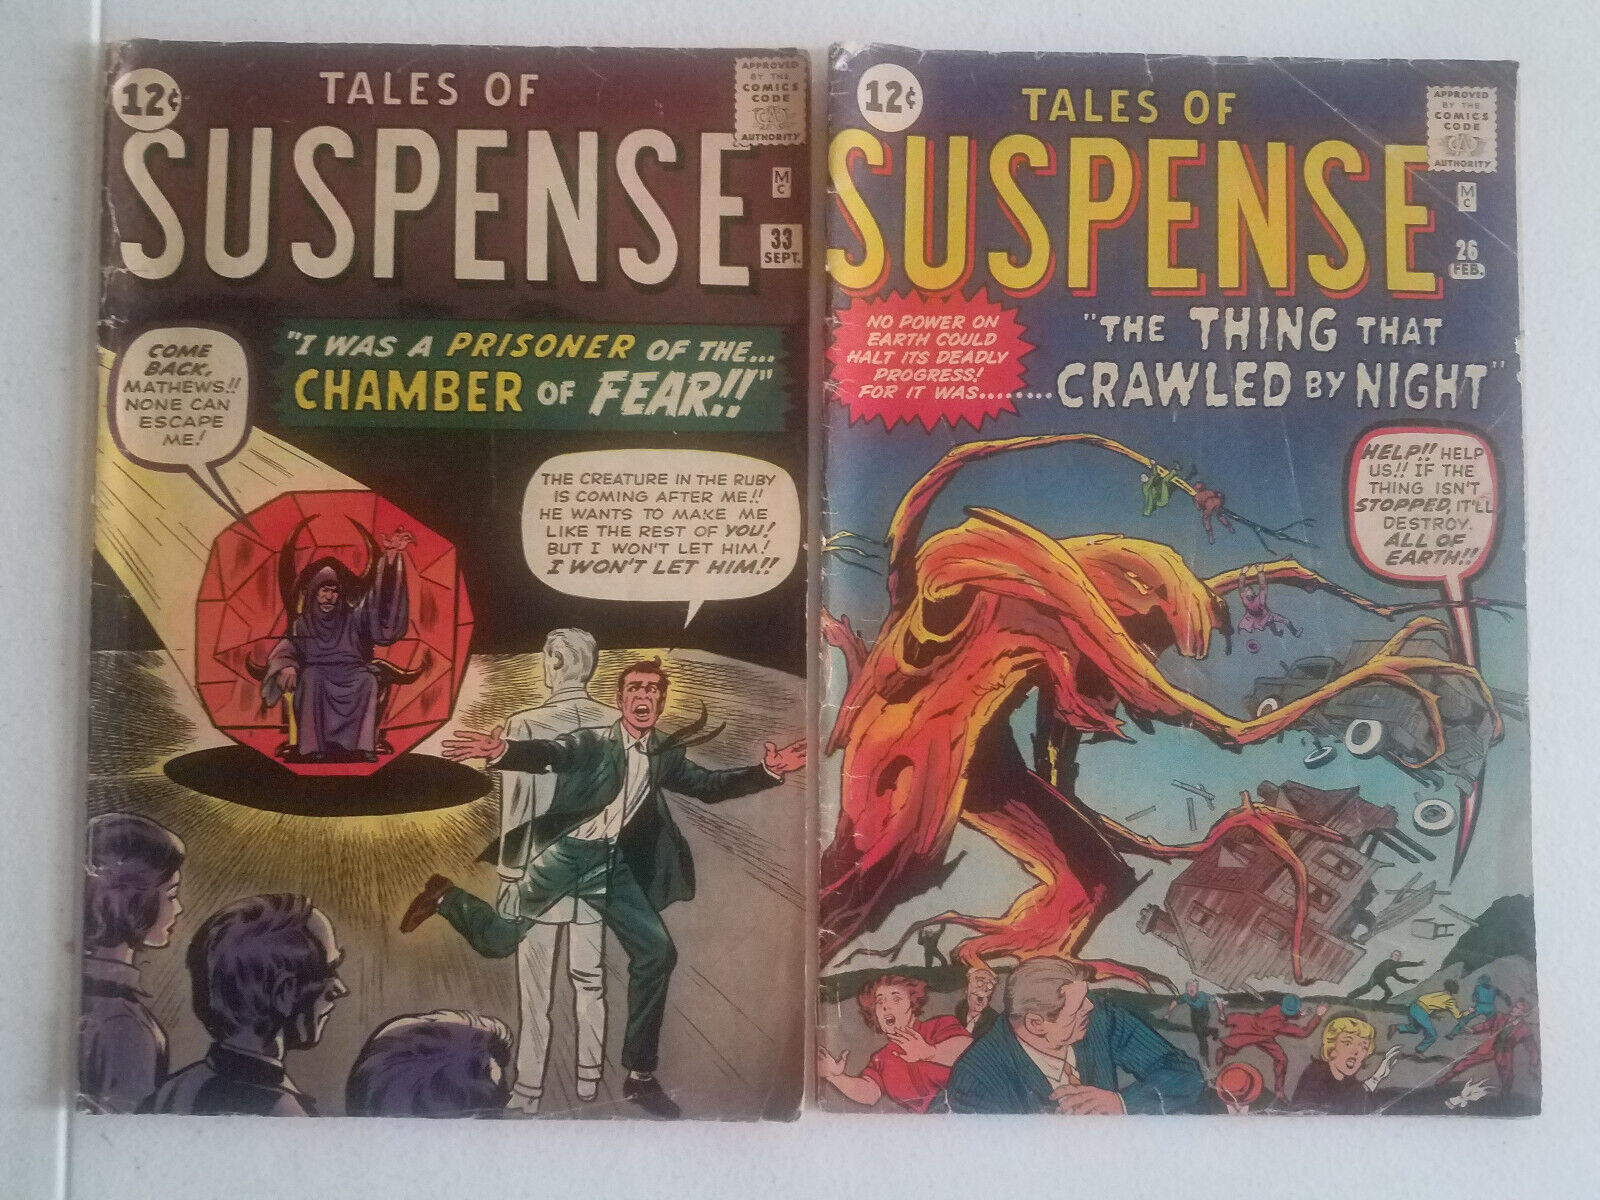 Tales of Suspense issue 26 issue 33 Silver age MA